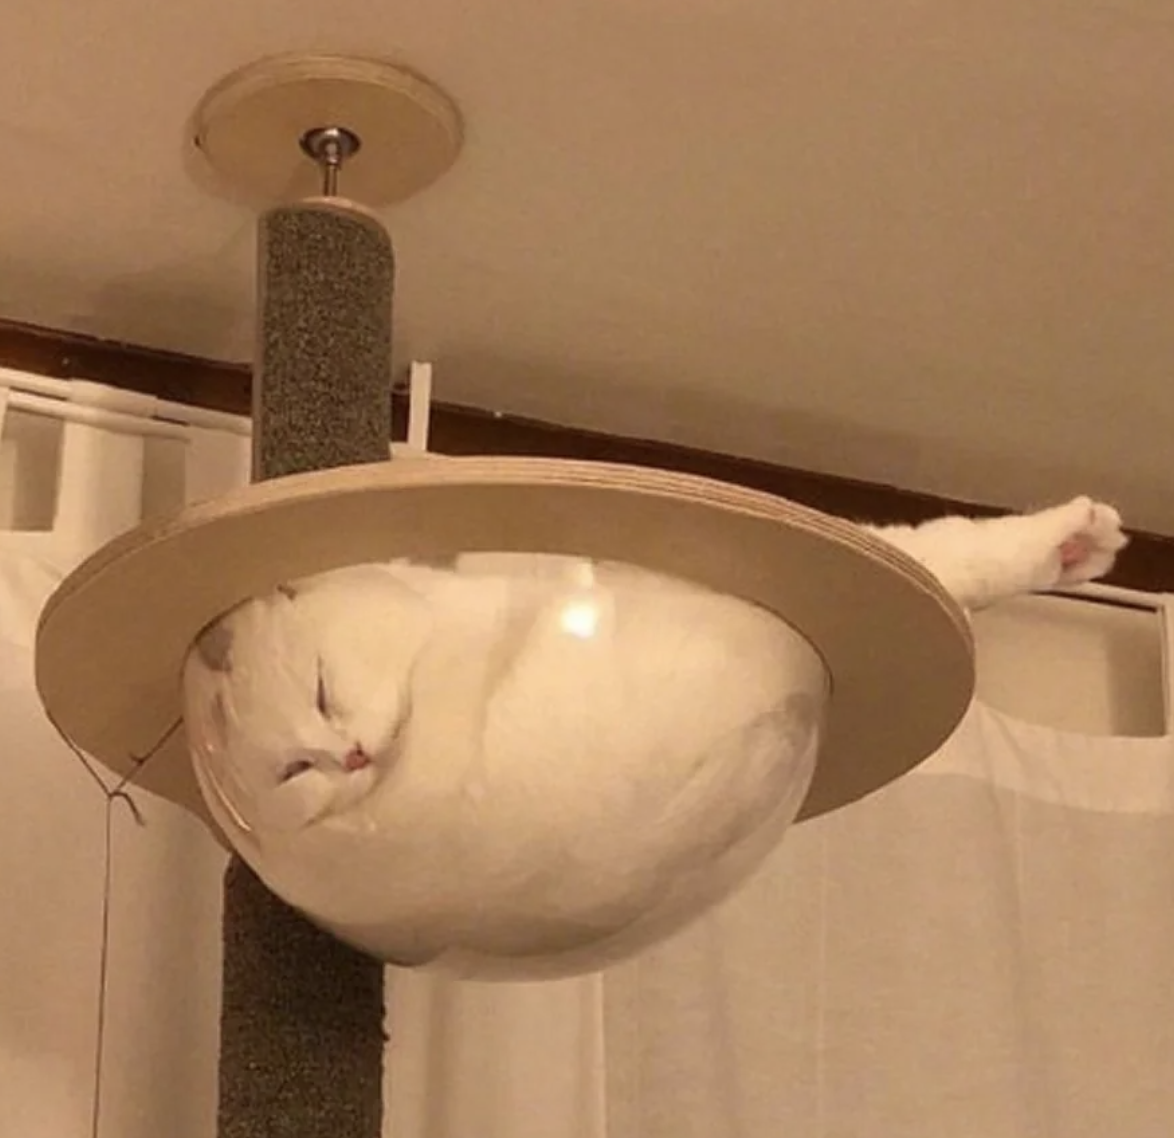 A white cat is sleeping snugly in a round hanging bed attached to a cat tree